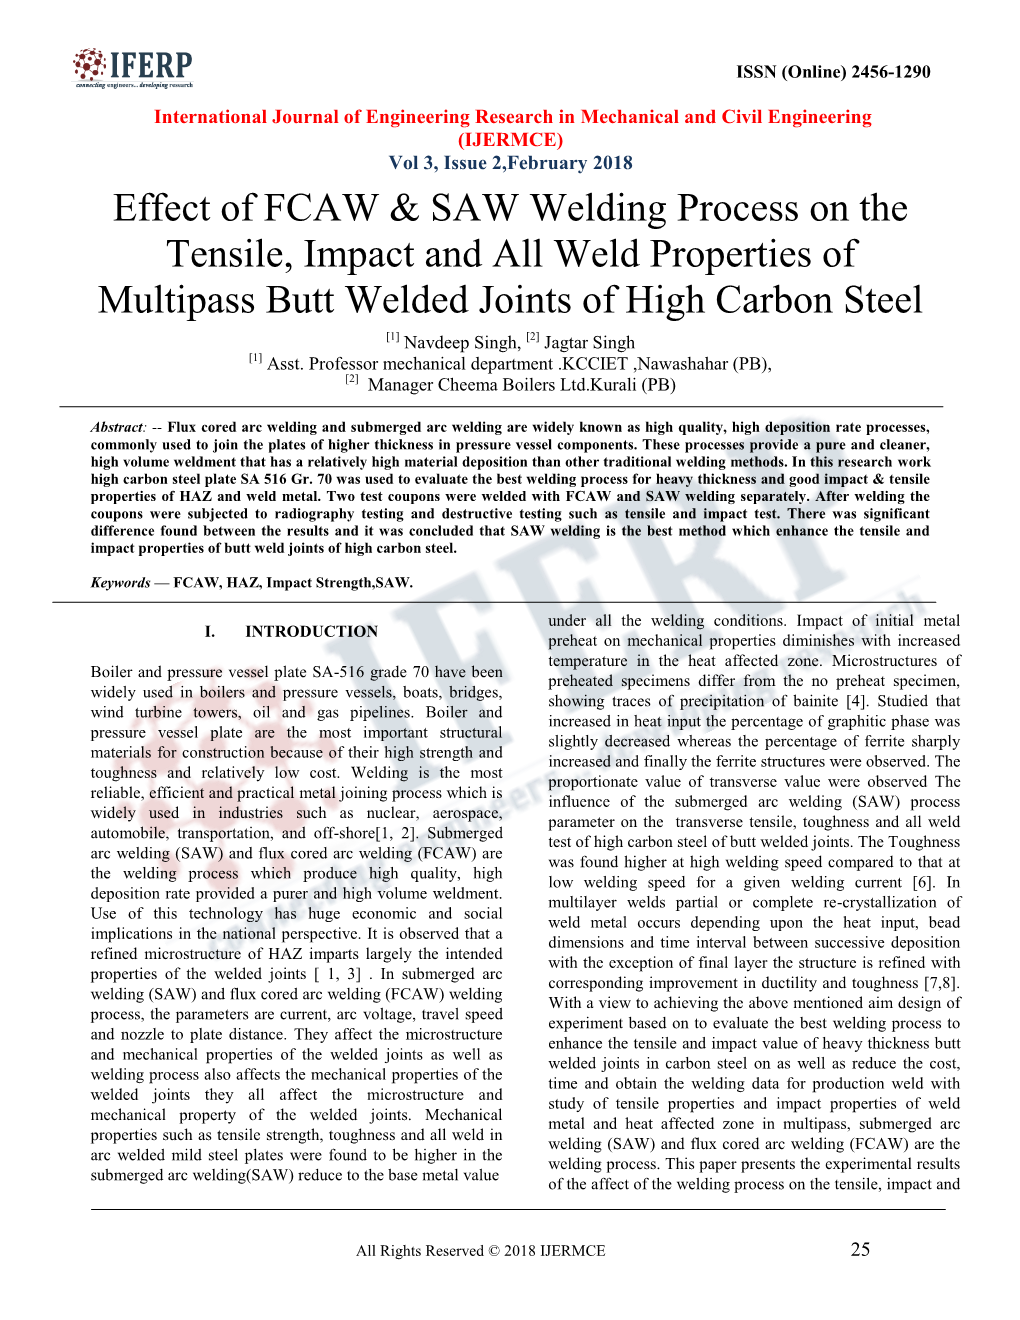 Effect of FCAW & SAW Welding Process on the Tensile, Impact And